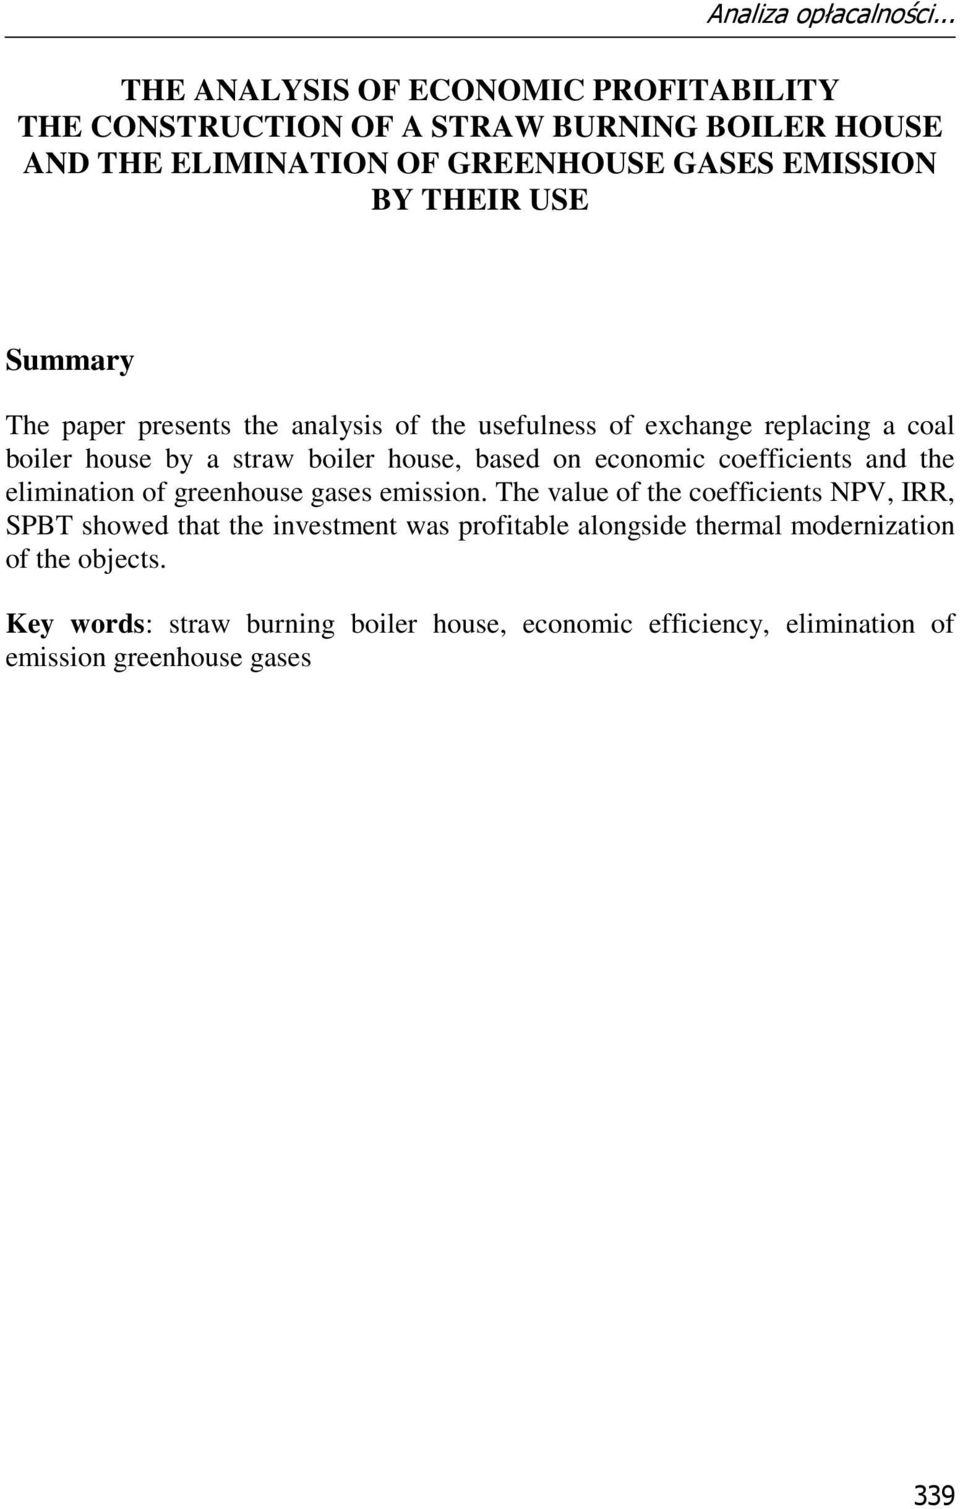 Summary The paper presents the analysis of the usefulness of exchange replacing a coal boiler house by a straw boiler house, based on economic